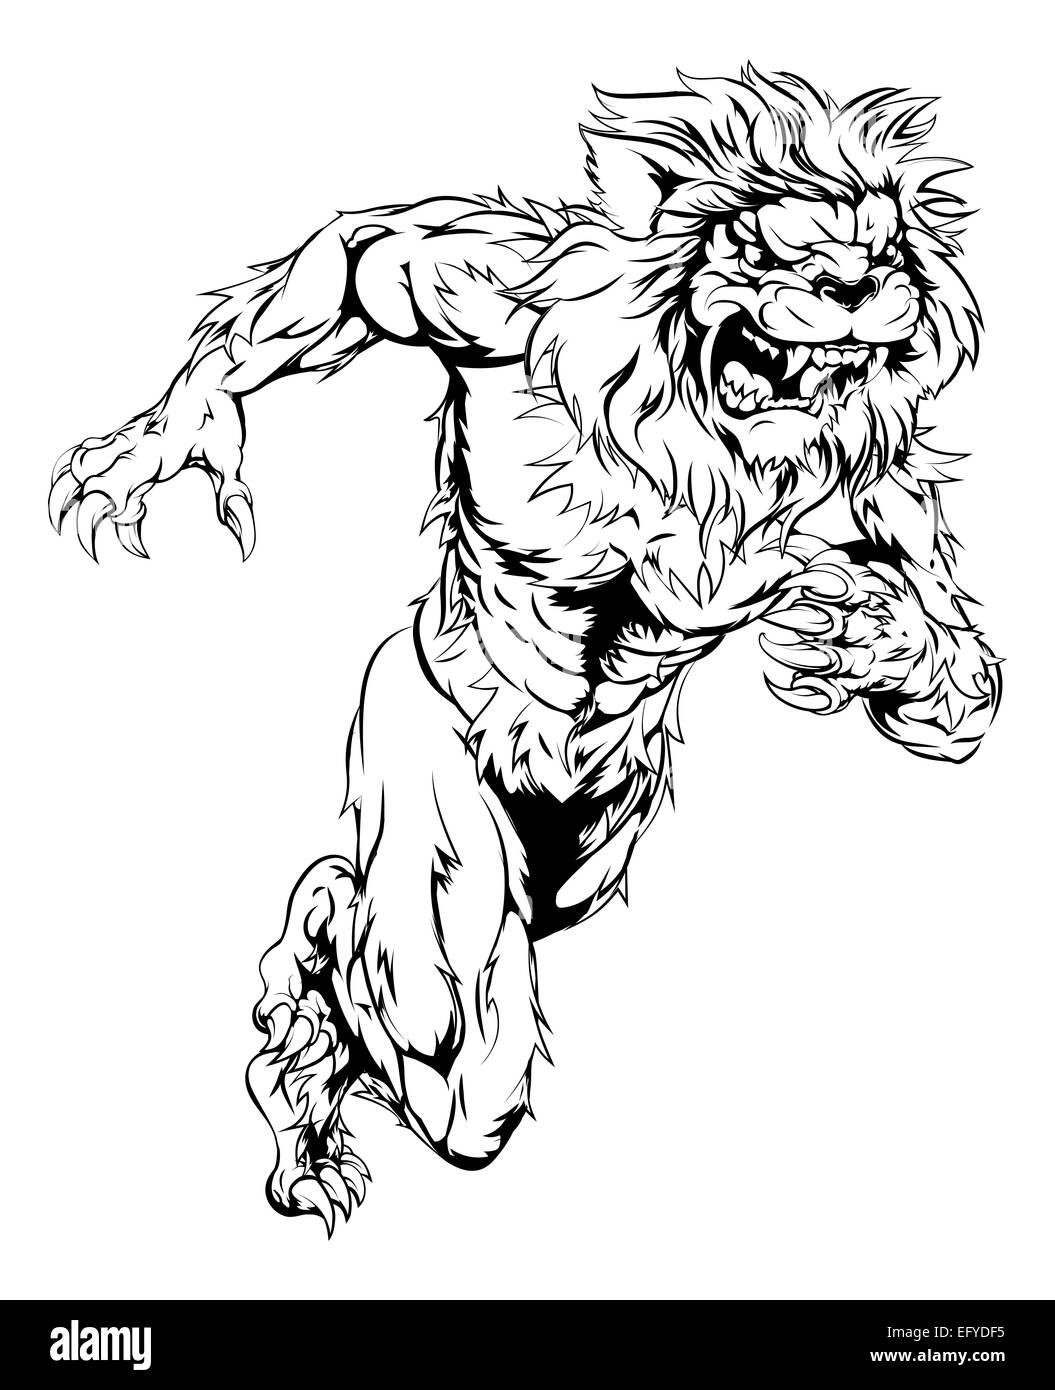 A lion man character or sports mascot charging, sprinting or running Stock Photo